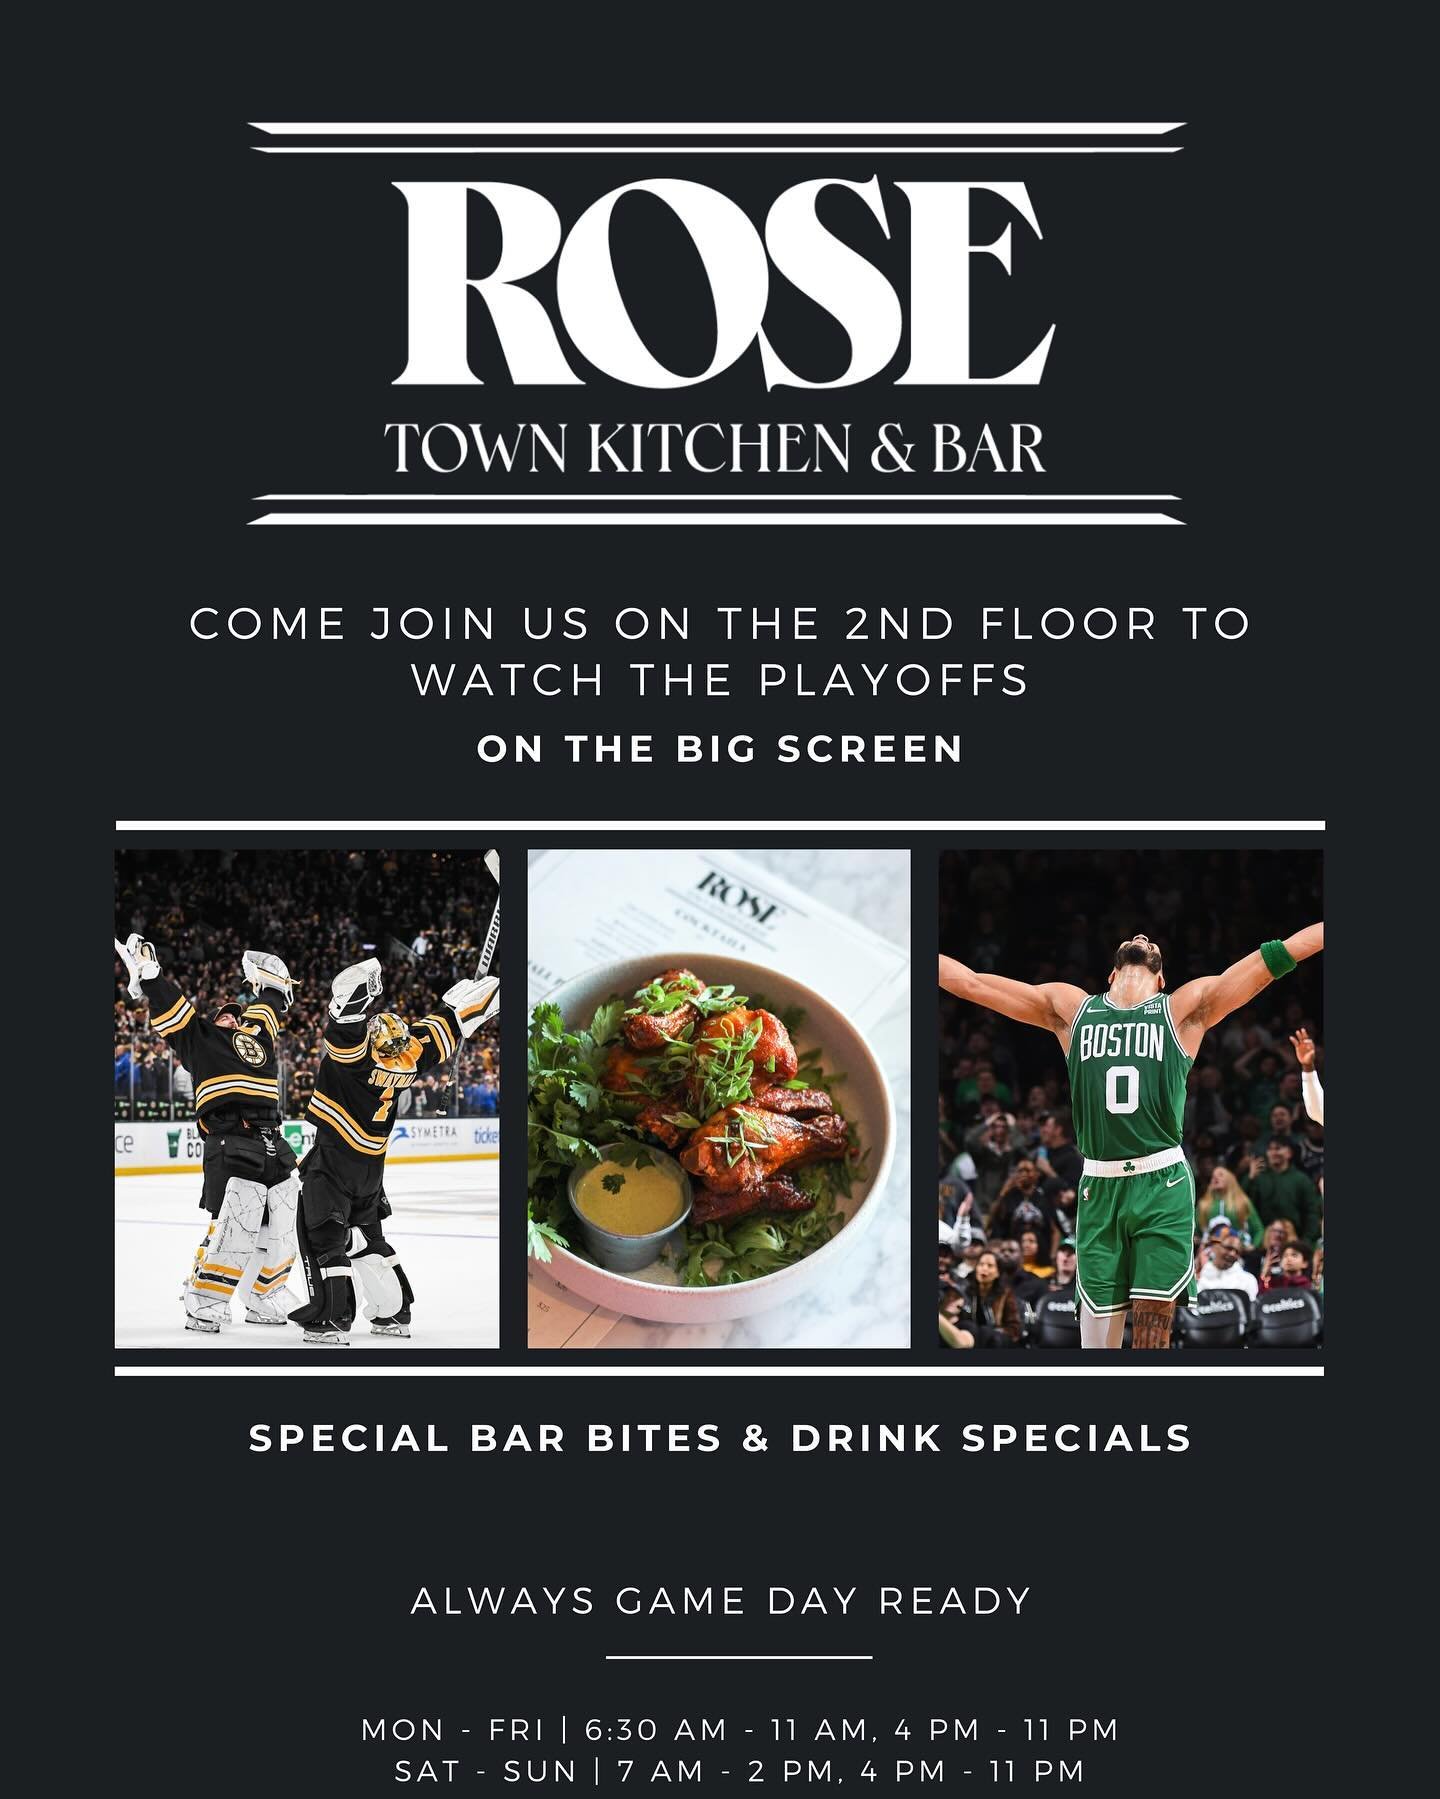 We are geared up for the playoffs, are you?

Join us at Rose to watch your favorite teams on the big screen! Delicious bites, tasty drinks and a full house of fans at Rose Town Kitchen and Bar. Let&rsquo;s go Boston!

#rosetownkitchenandbar #playoffh